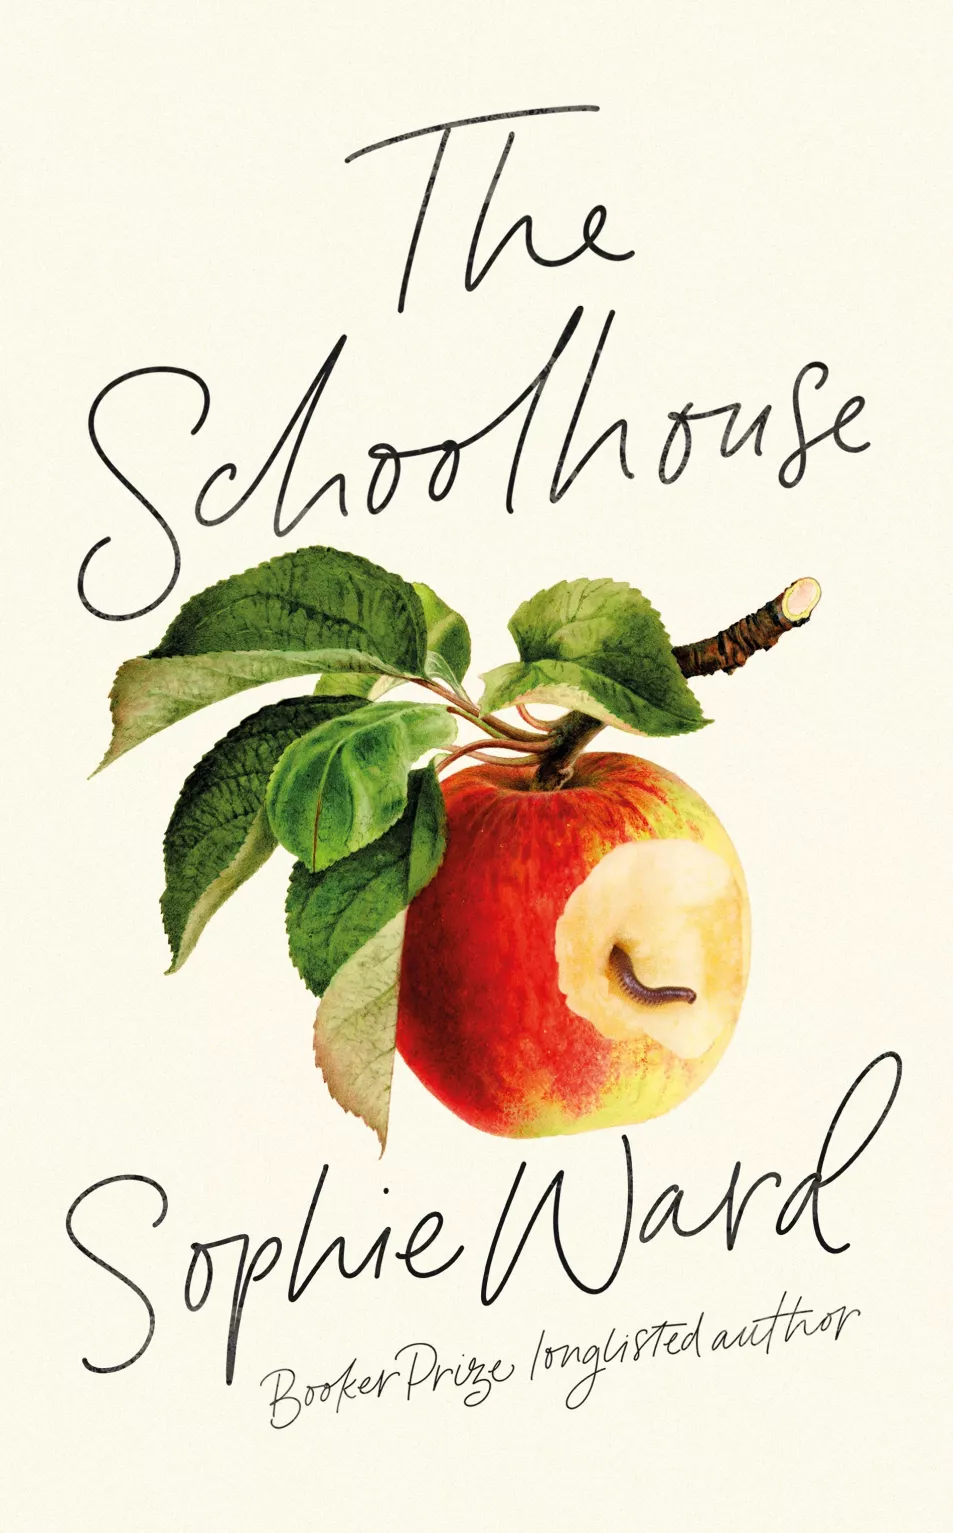 The Schoolhouse by Sophie Ward